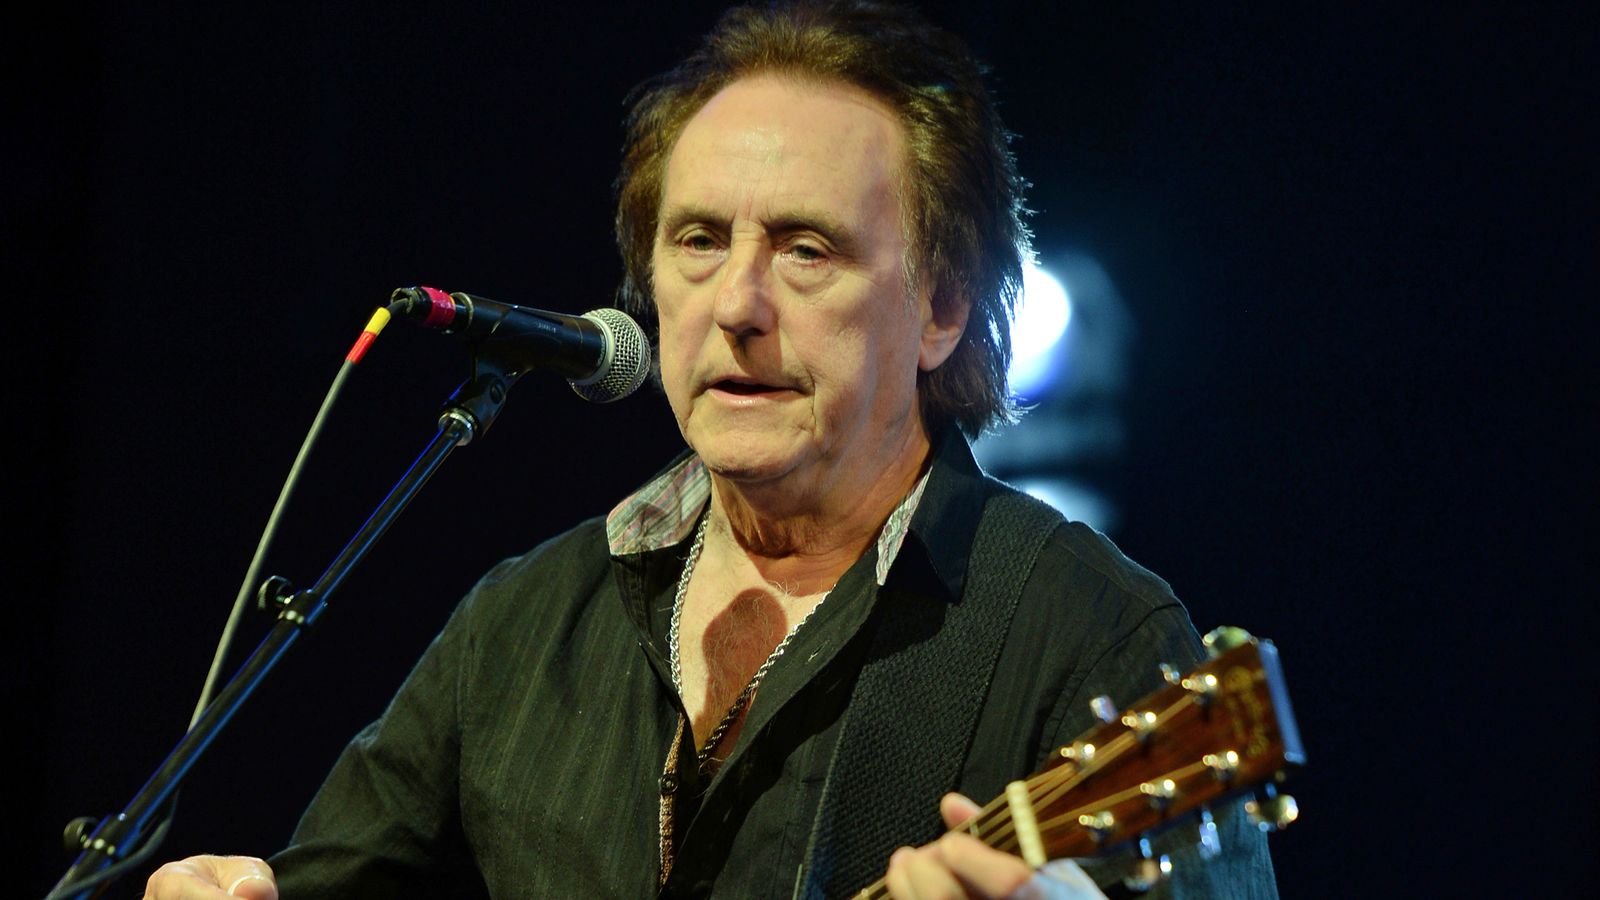 Denny Laine: Paul McCartney pays tribute after Moody Blues singer and Wings guitarist dies aged 79